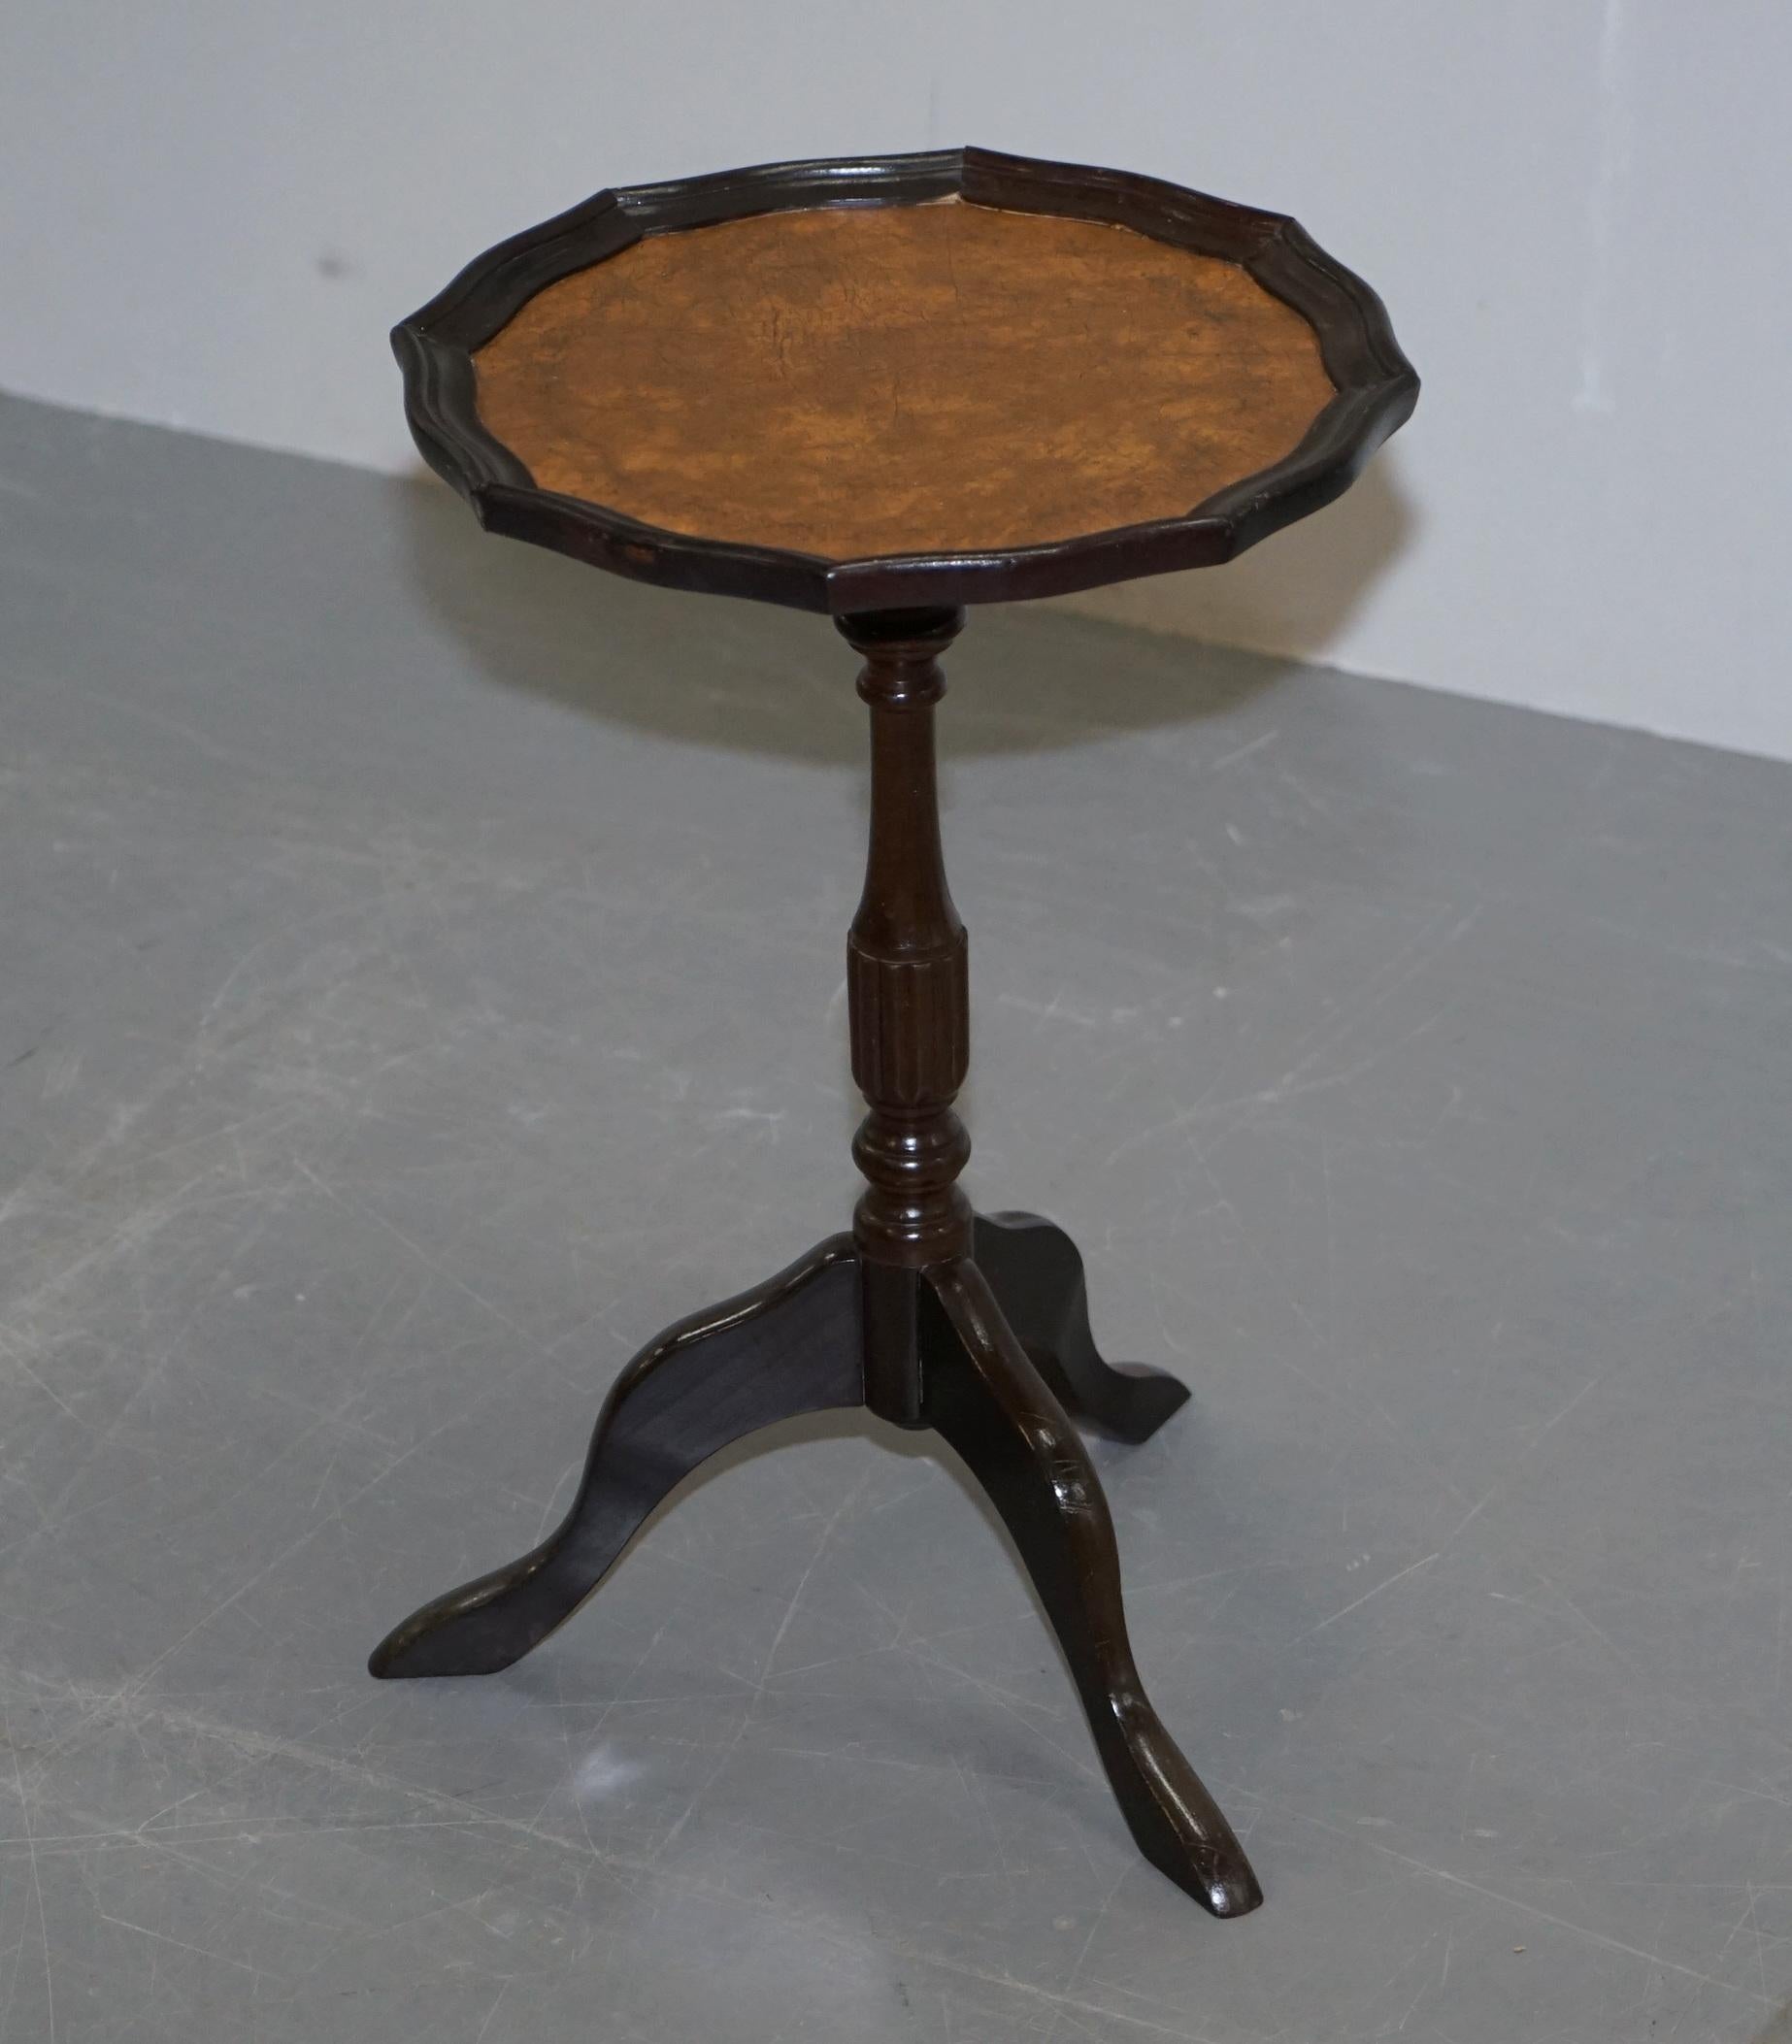 We are delighted to offer for sale this lovely vintage circa 1940s Mahogany with brown leather top lamp or side table

A good looking well made tripod table in lovely condition, we have cleaned waxed and polished it from top to bottom, there may